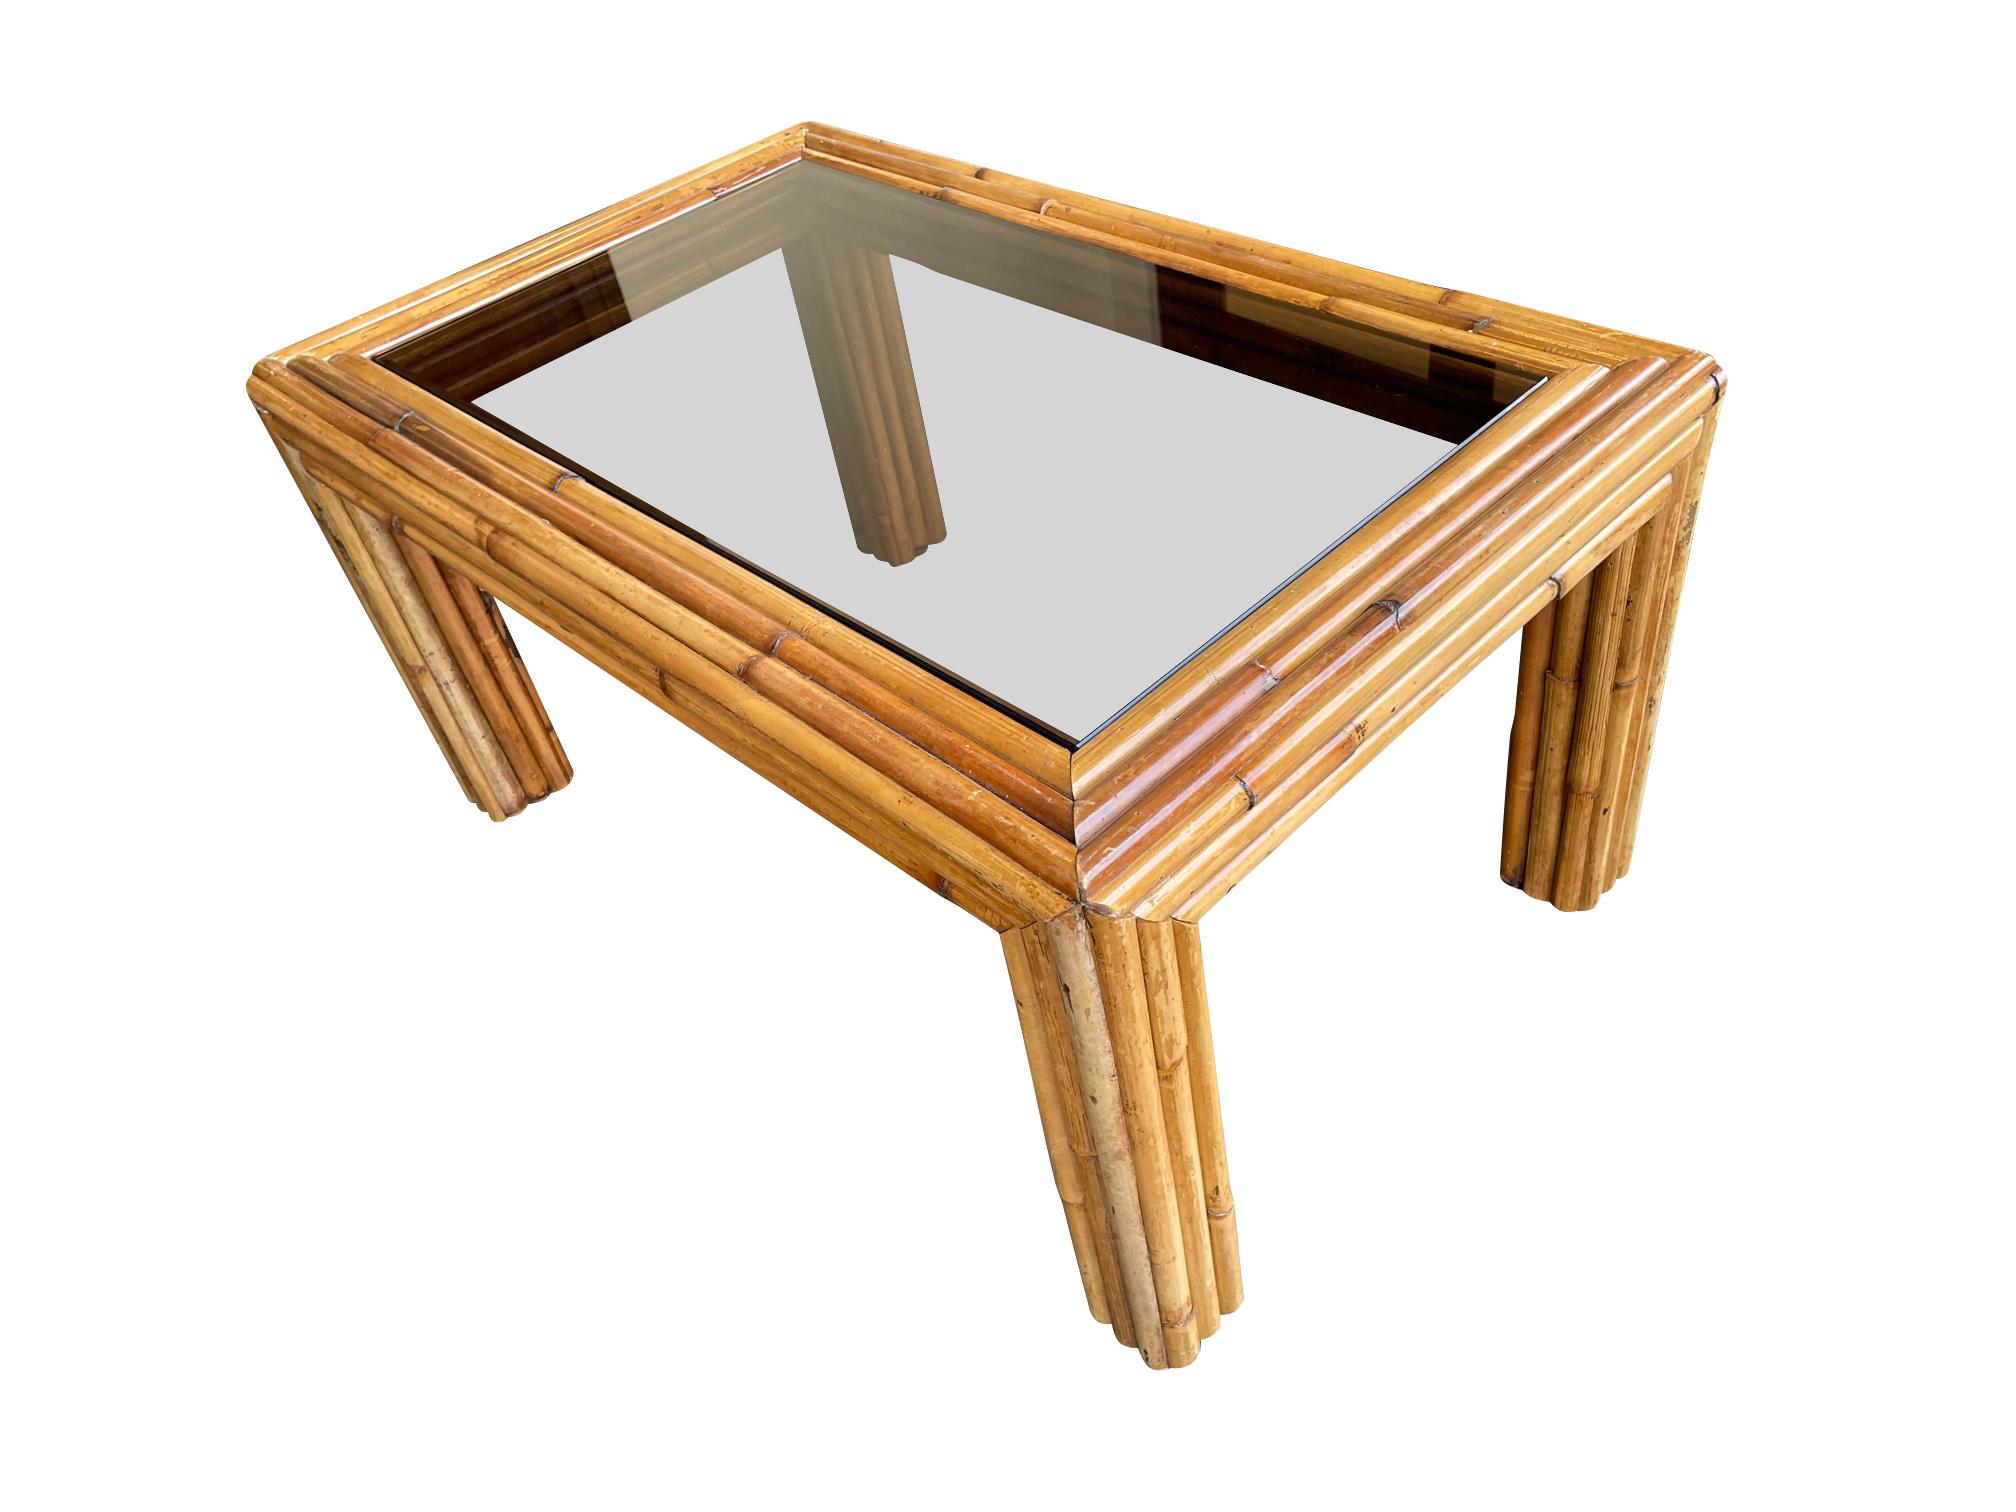 Italian 1970s Bamboo Coffee Table with Smoked Glass In Good Condition For Sale In London, GB